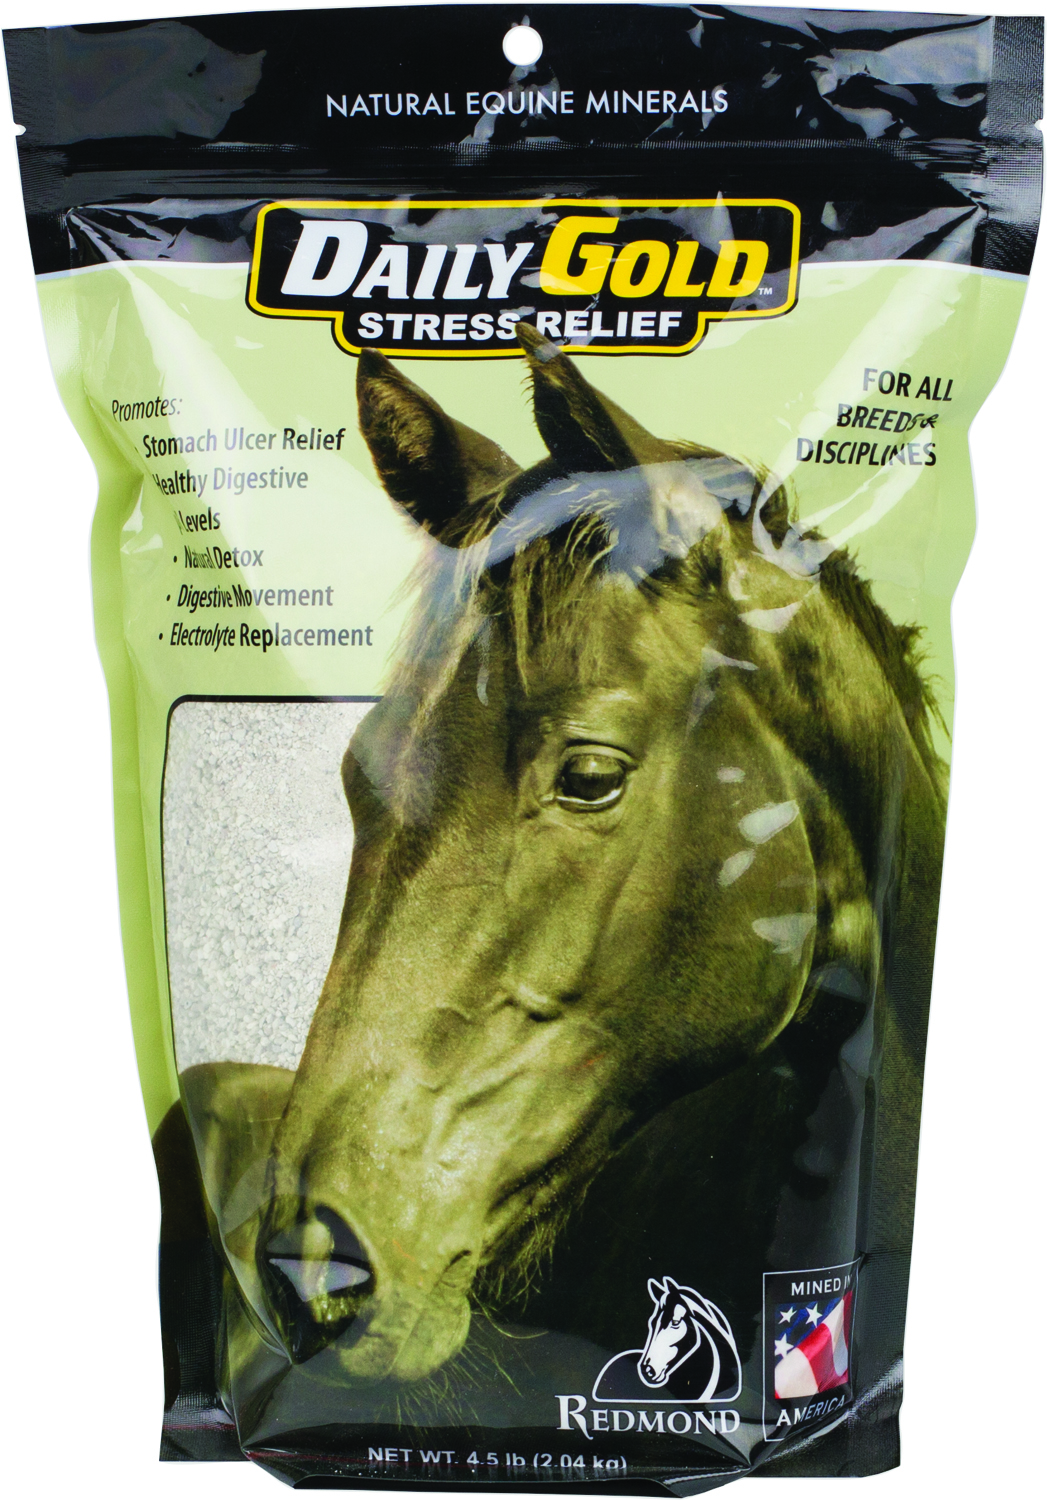 DAILY GOLD EQUINE STRESS RELIEF